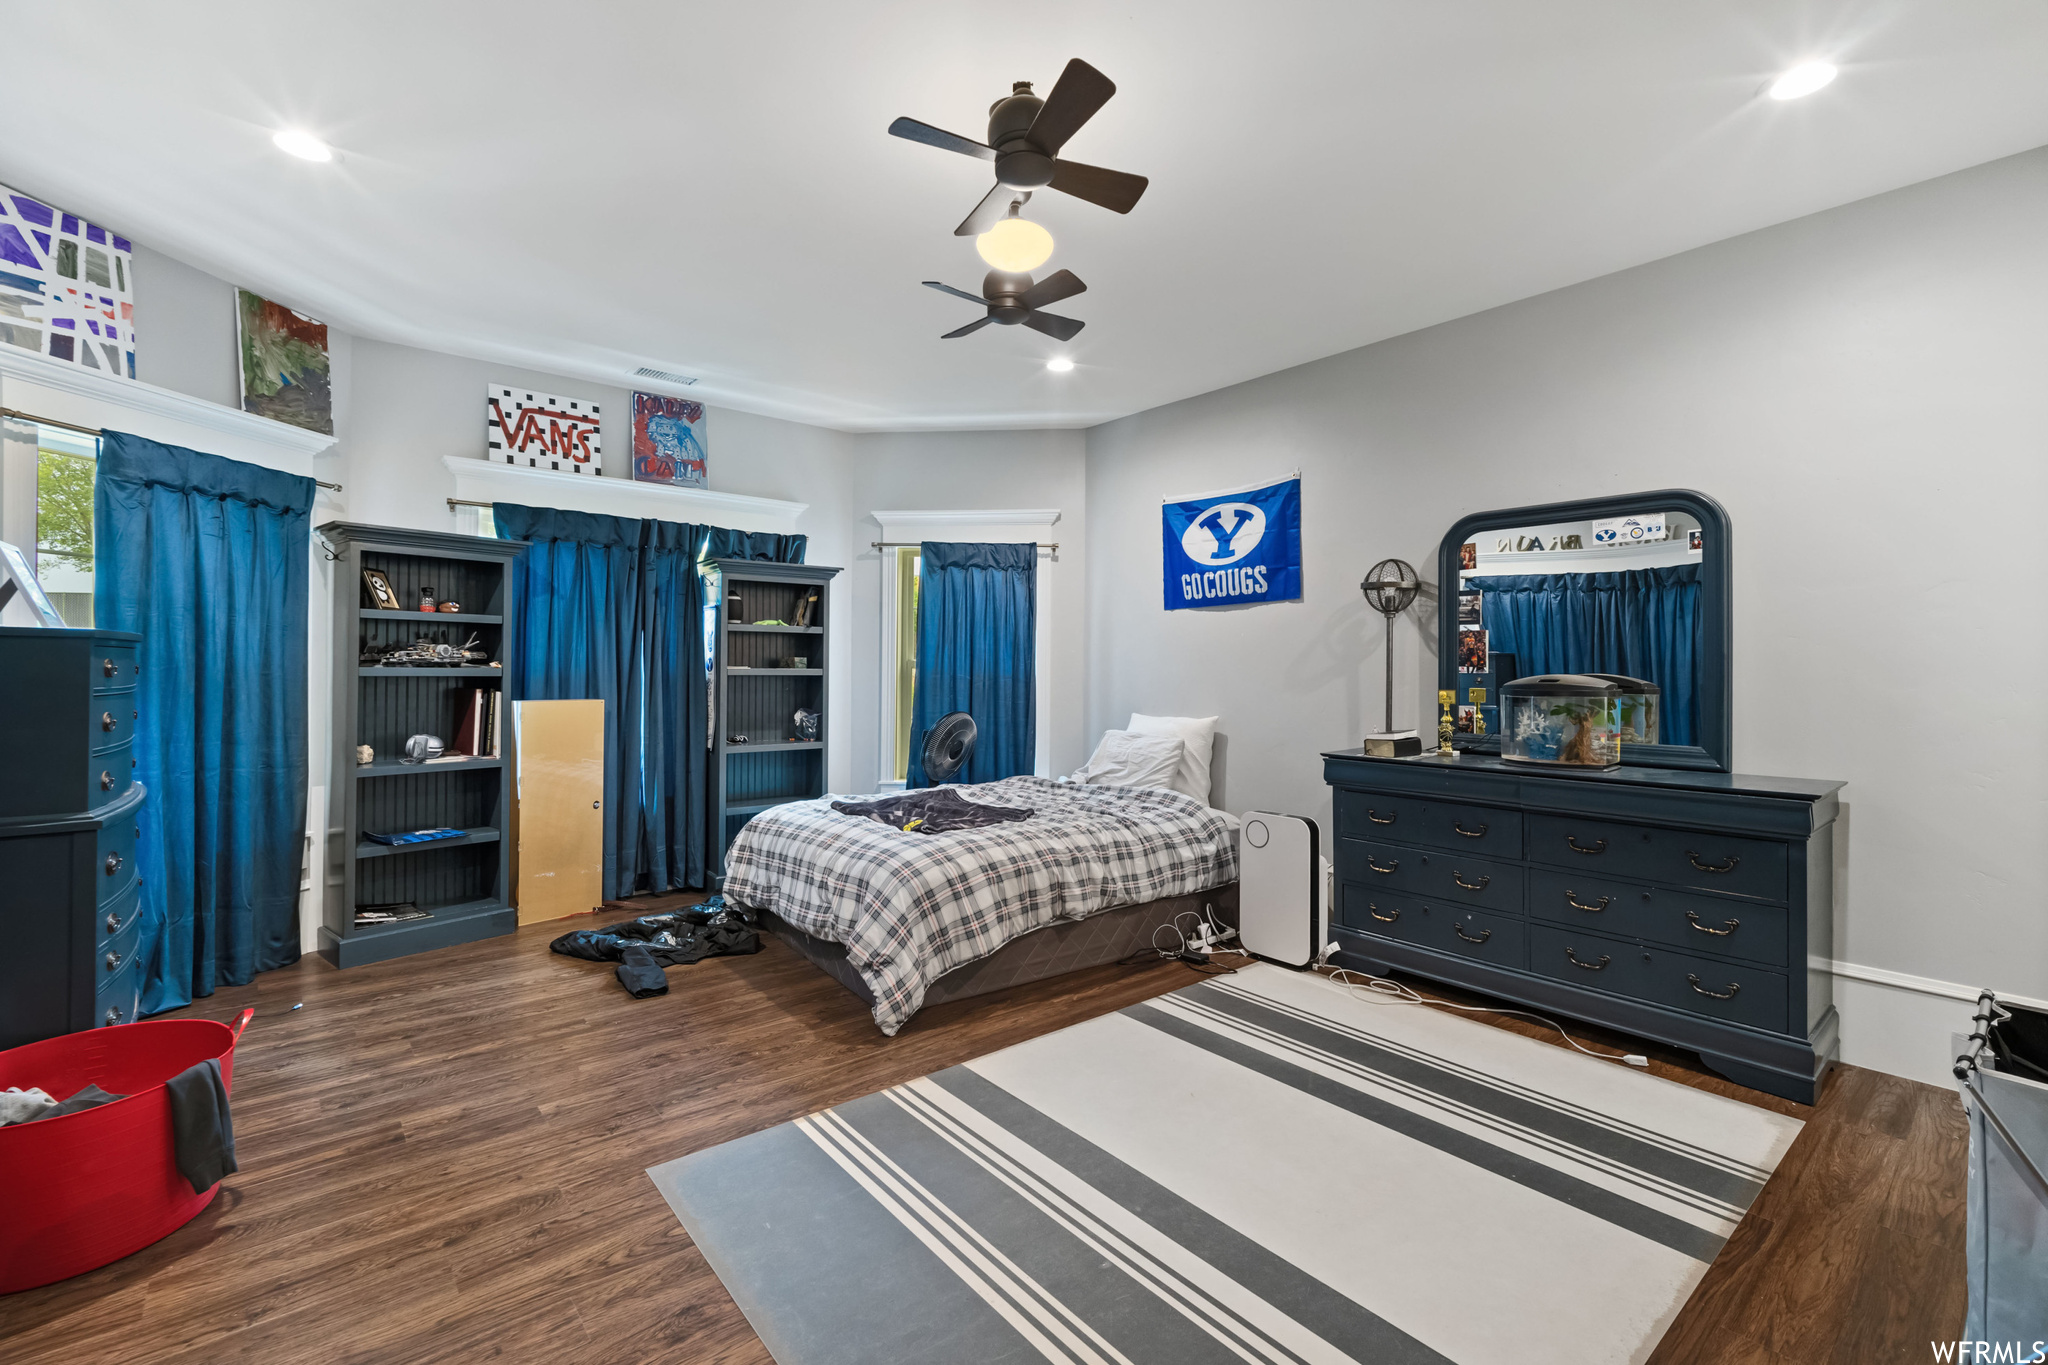 Bedroom with hardwood floors and a ceiling fan